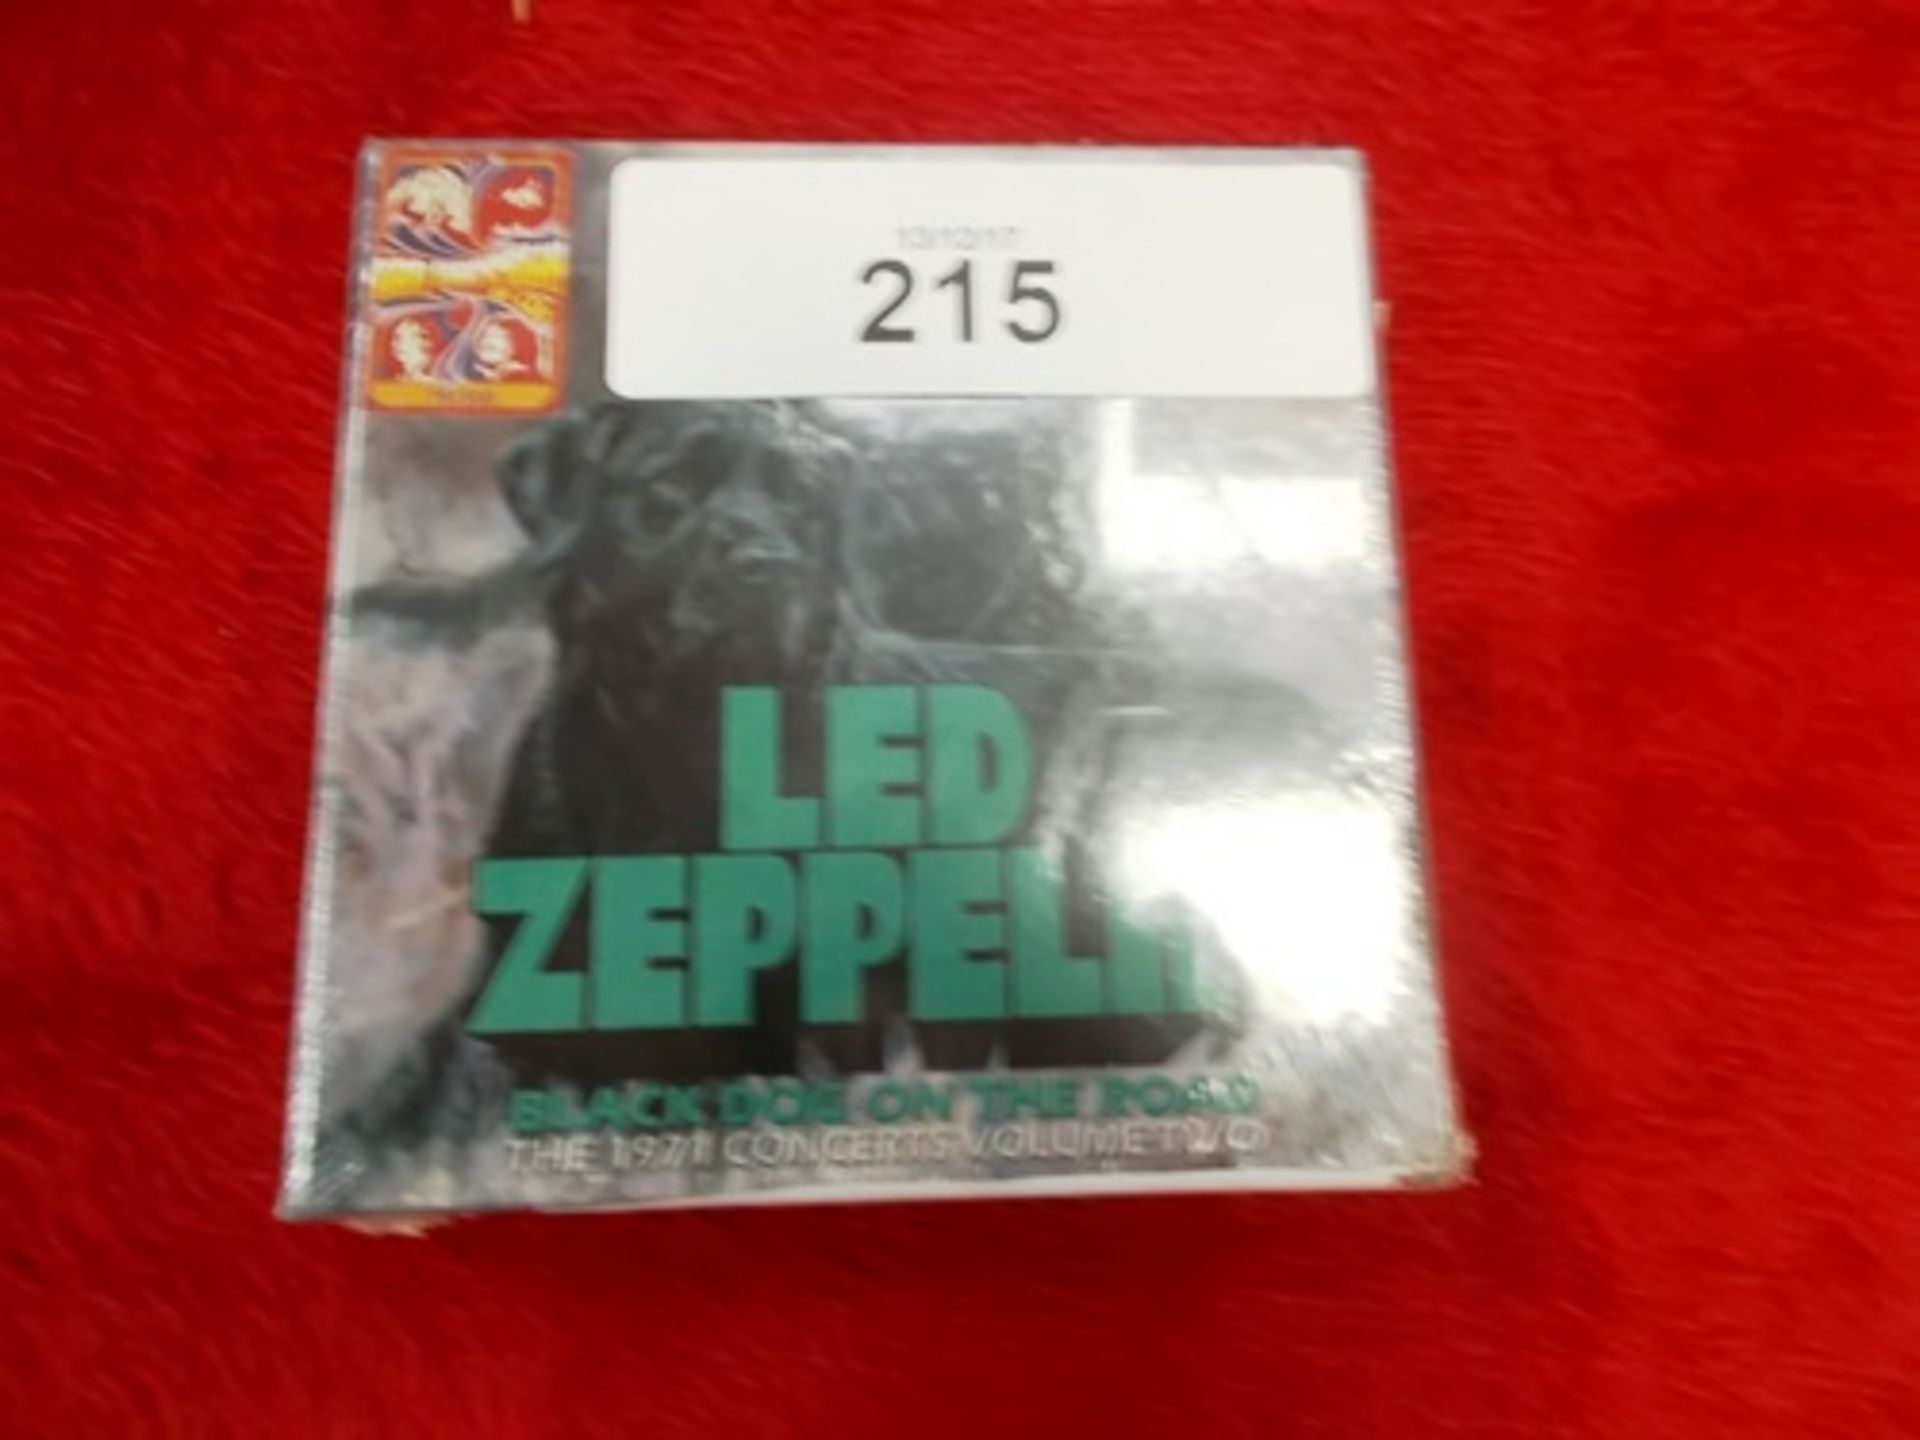 Led Zepplin Black Dog on the Road Again, the 1971 Concerts Vol 2 on 18 CD's - Sealed new in box (